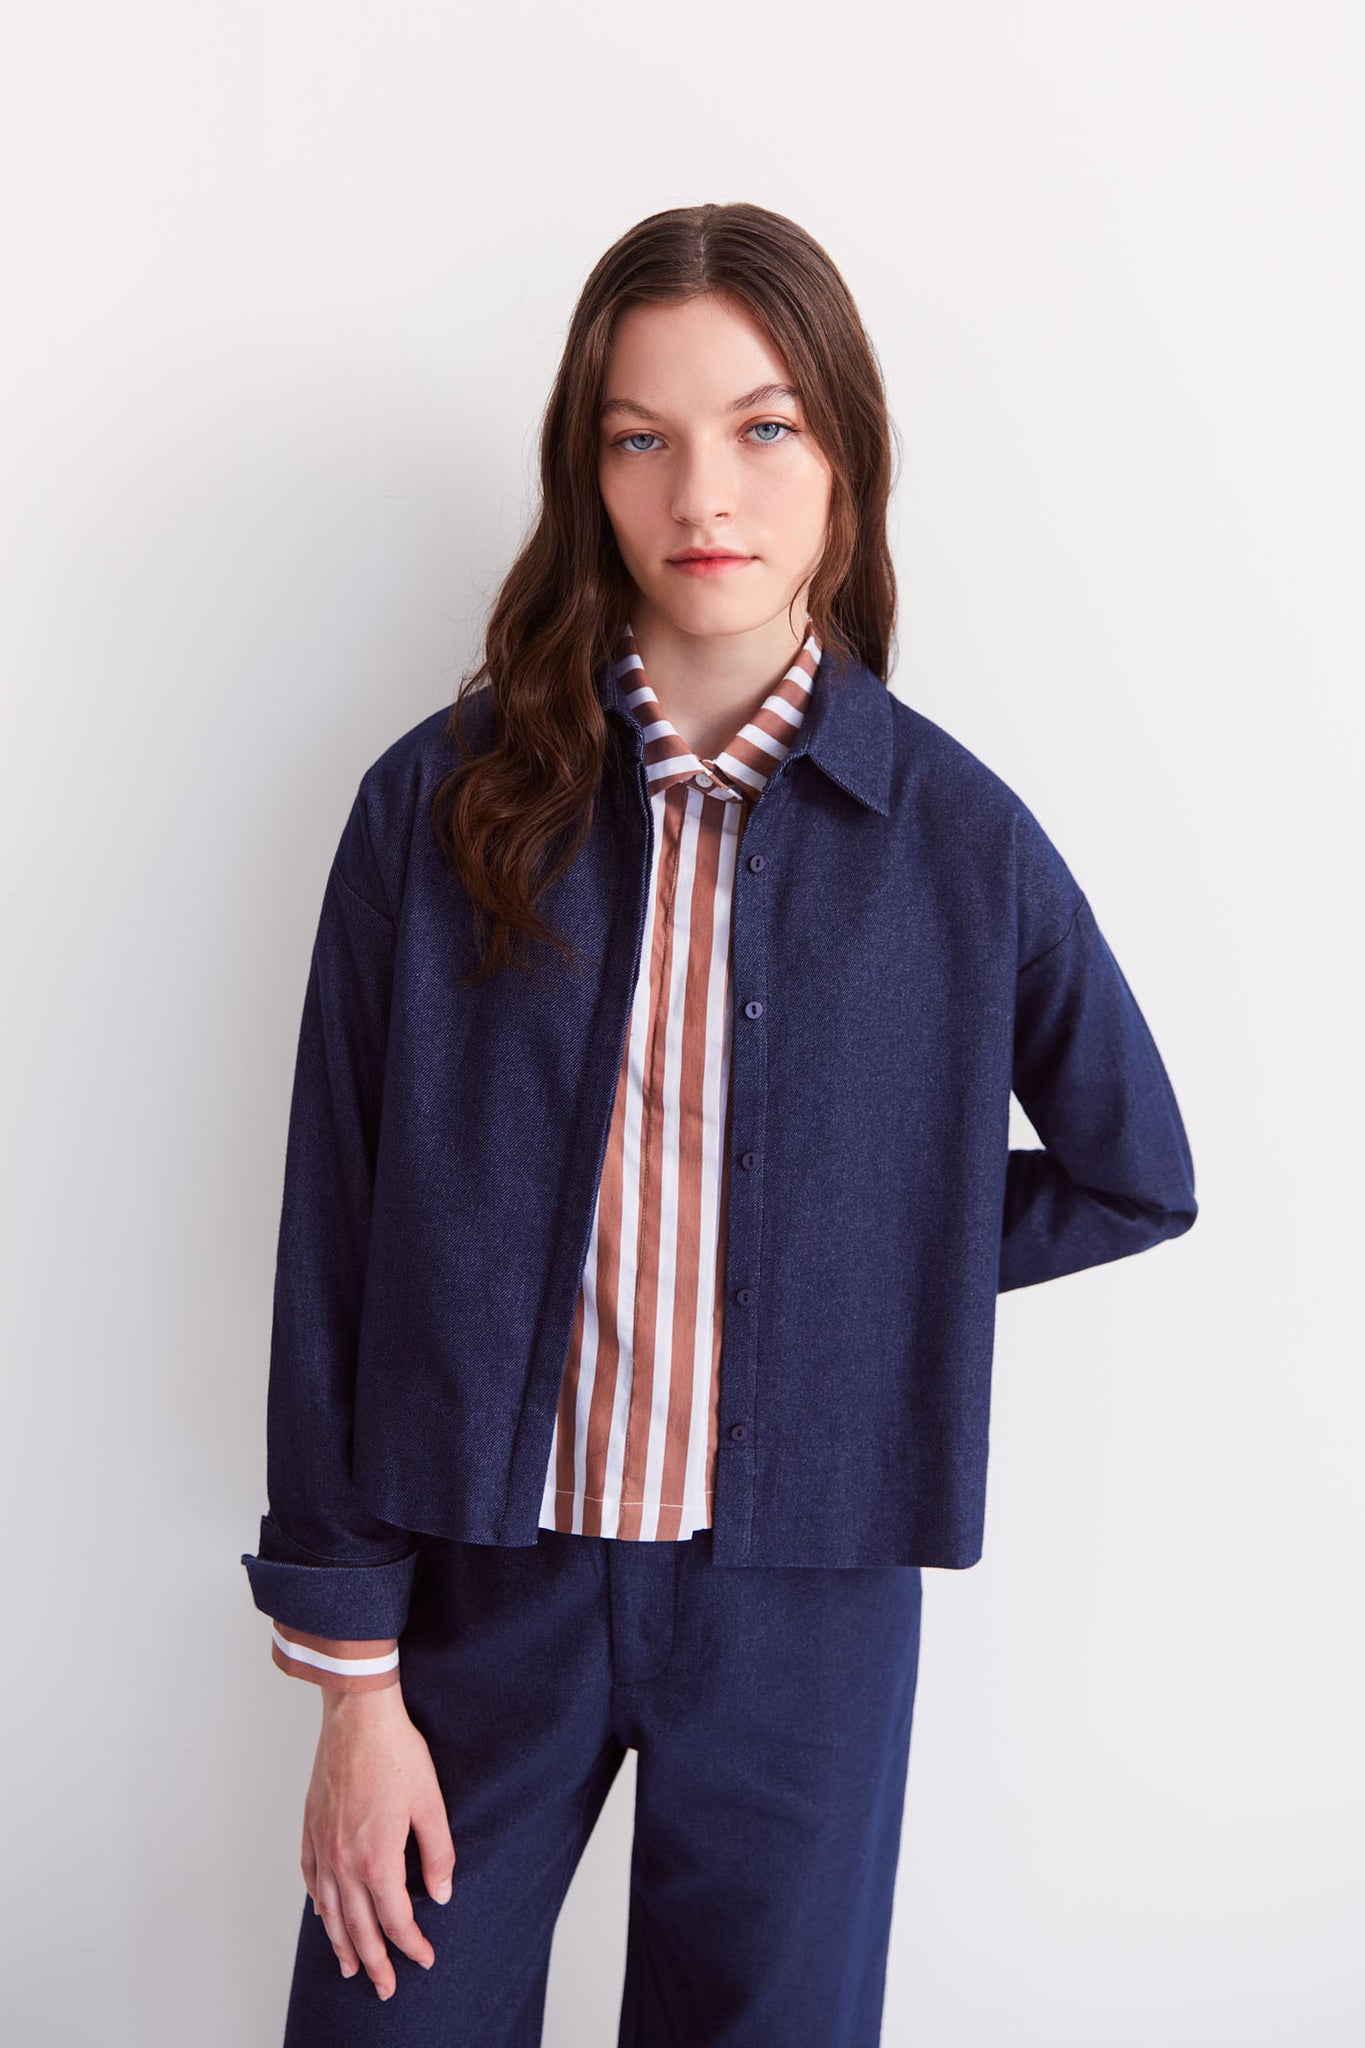 L.1061 - OVER BOXY SHIRT - Jean